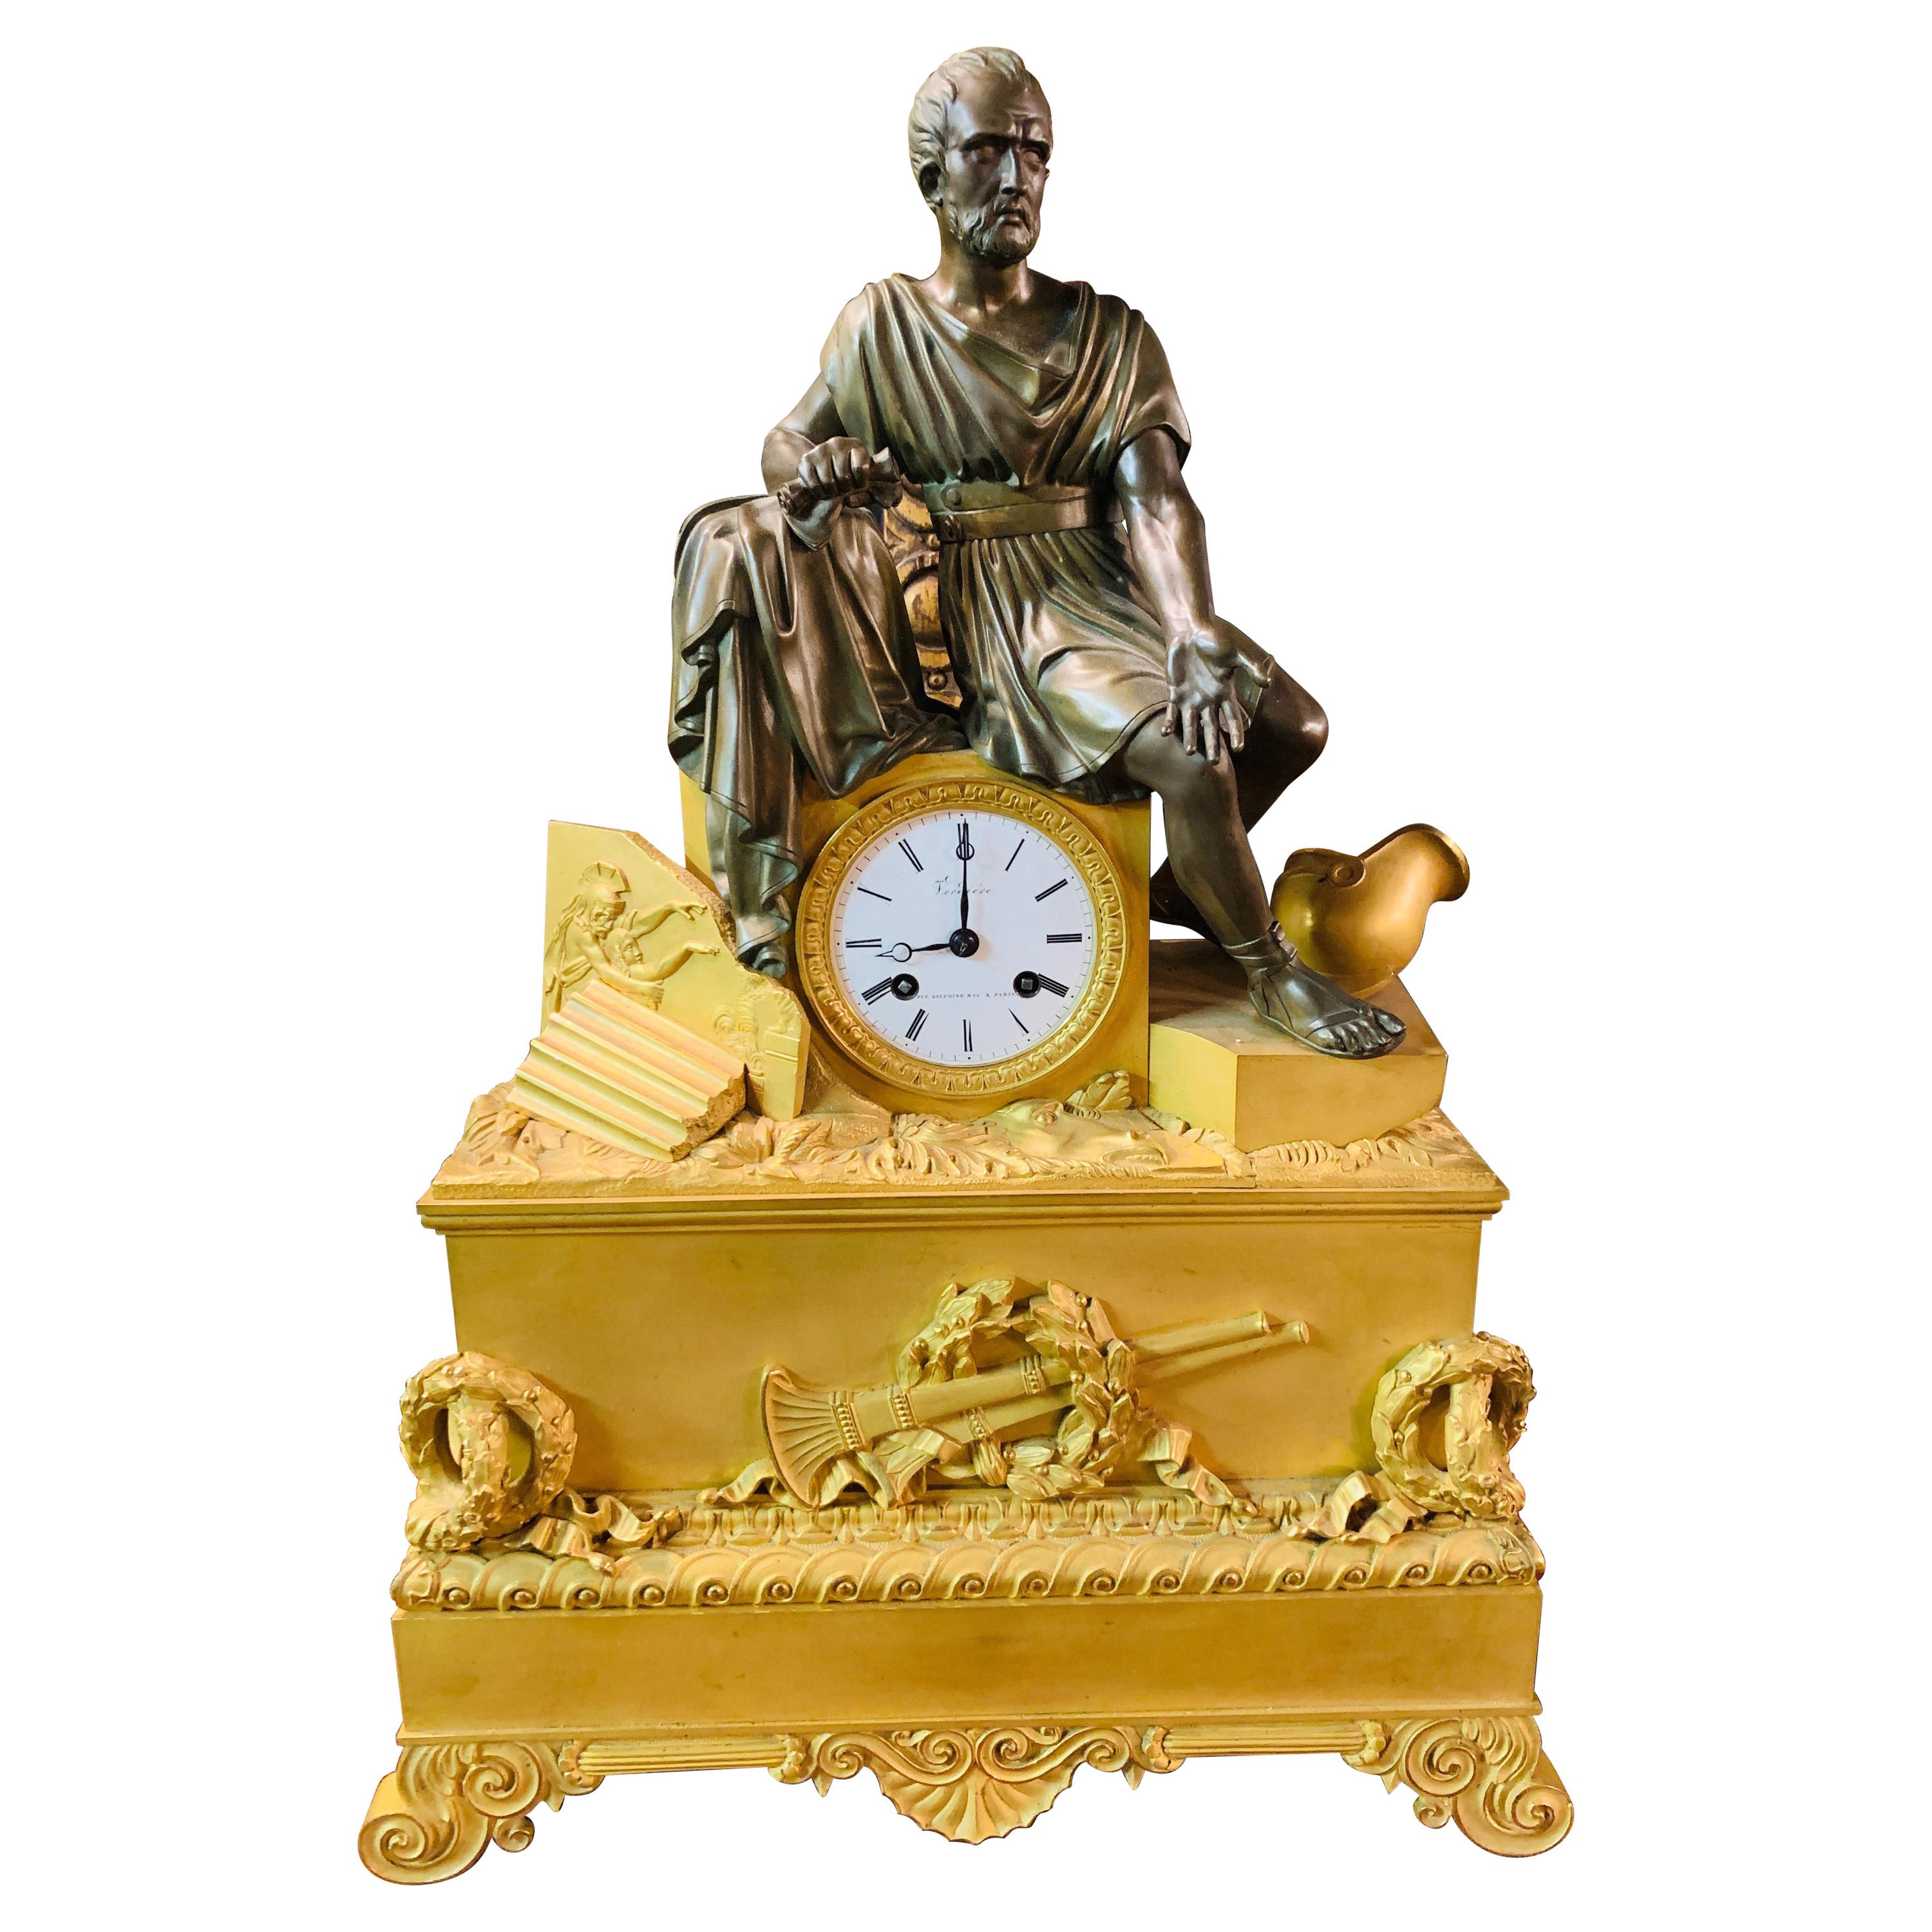 18th Century Exquisite French Roman Figural Table Clock